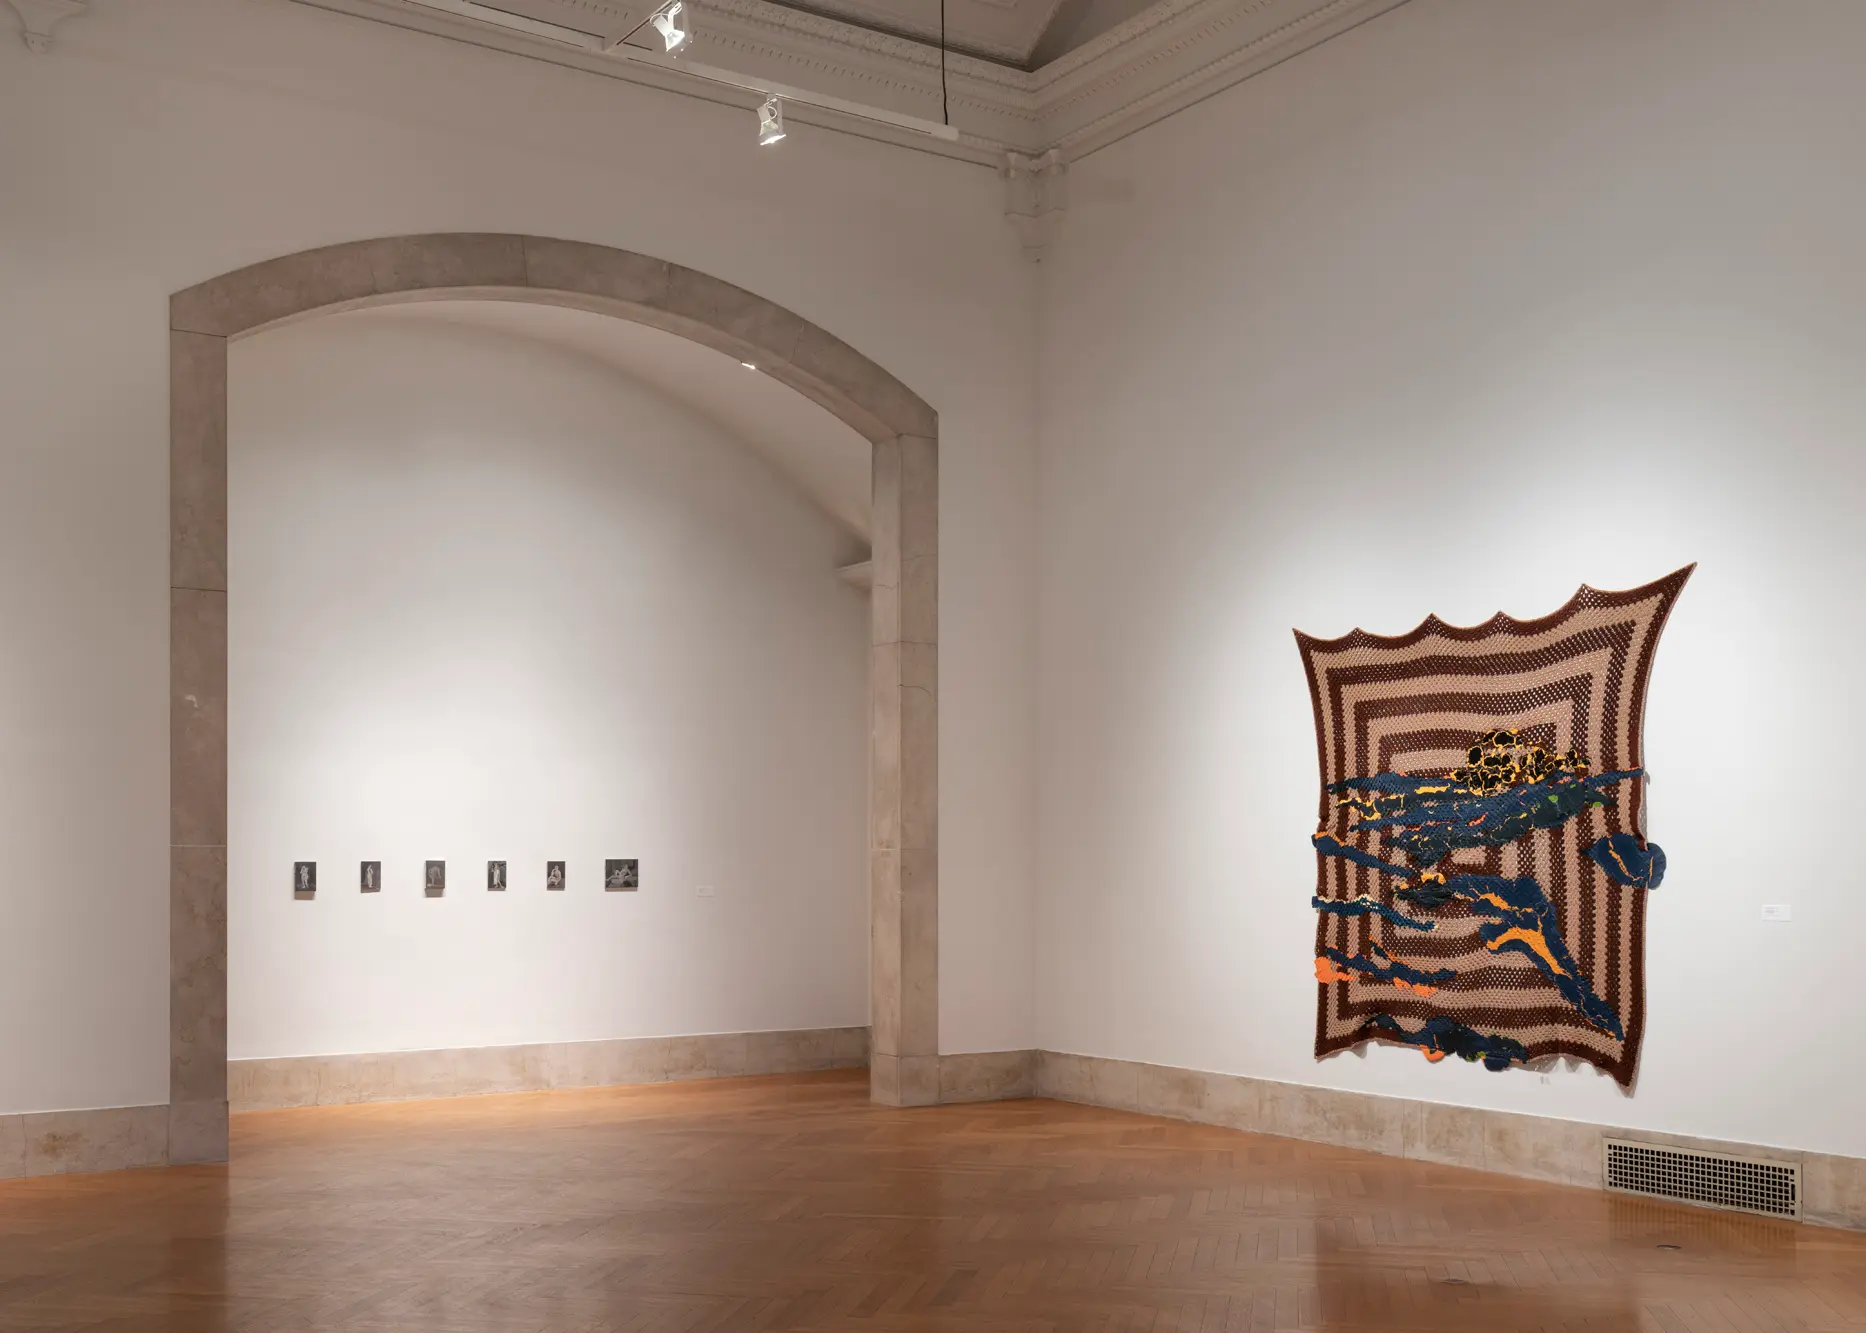 In a gallery, a series of small artworks positioned in a straight line adorn a wall within a large arched entryway. To the right of the entryway, a geometric fabric work hangs on a wall. 